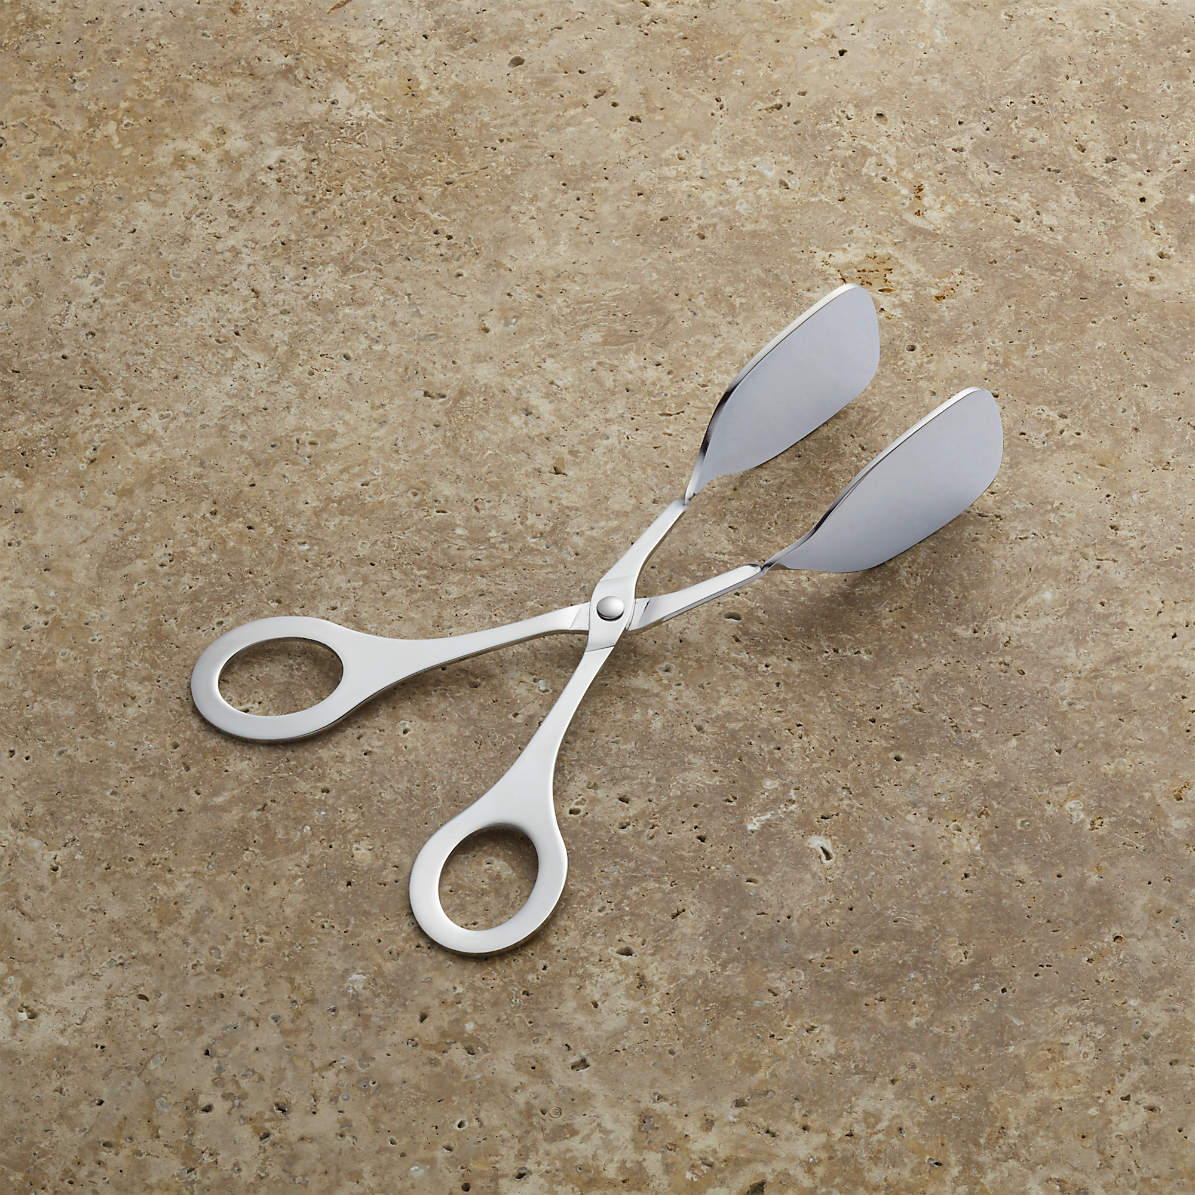 Stainless Steel Mini Serving Tongs + Reviews